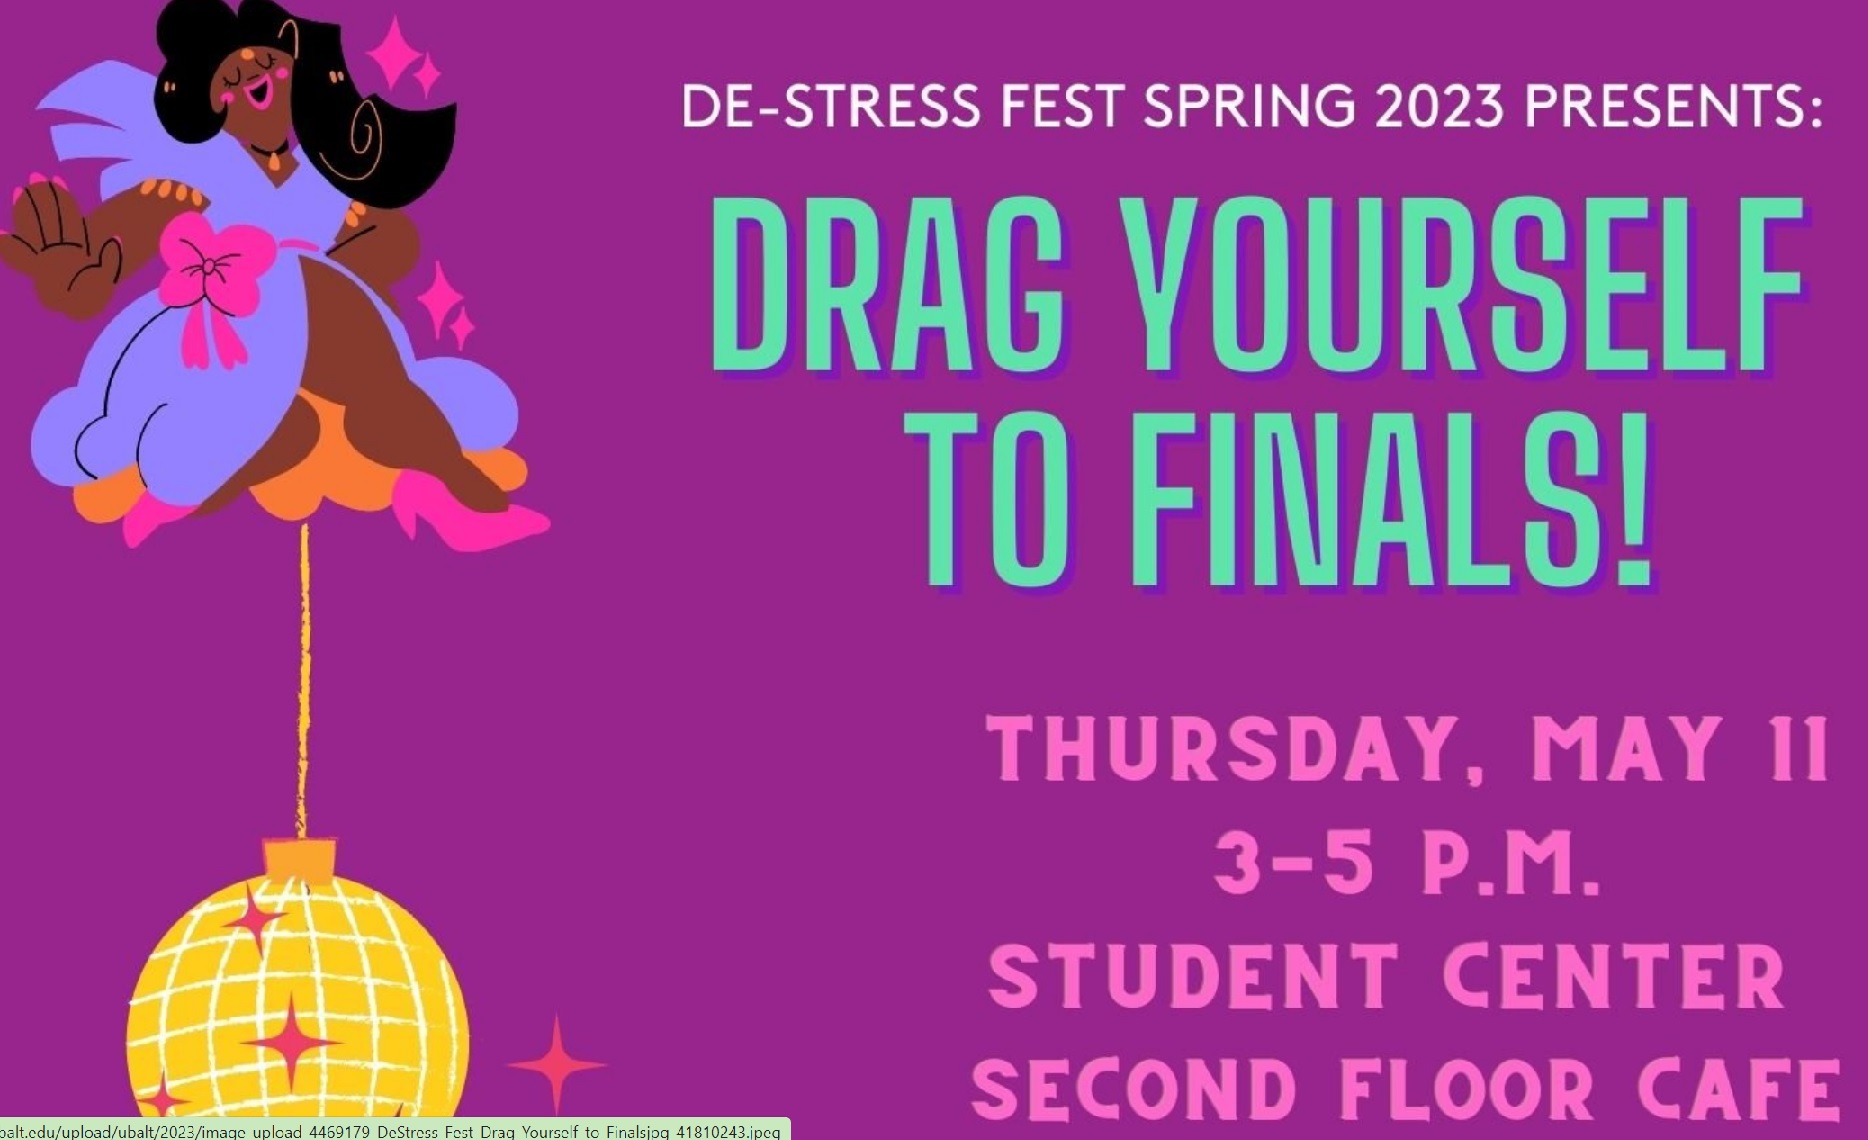 DRAG YOURSELF TO FINALS!